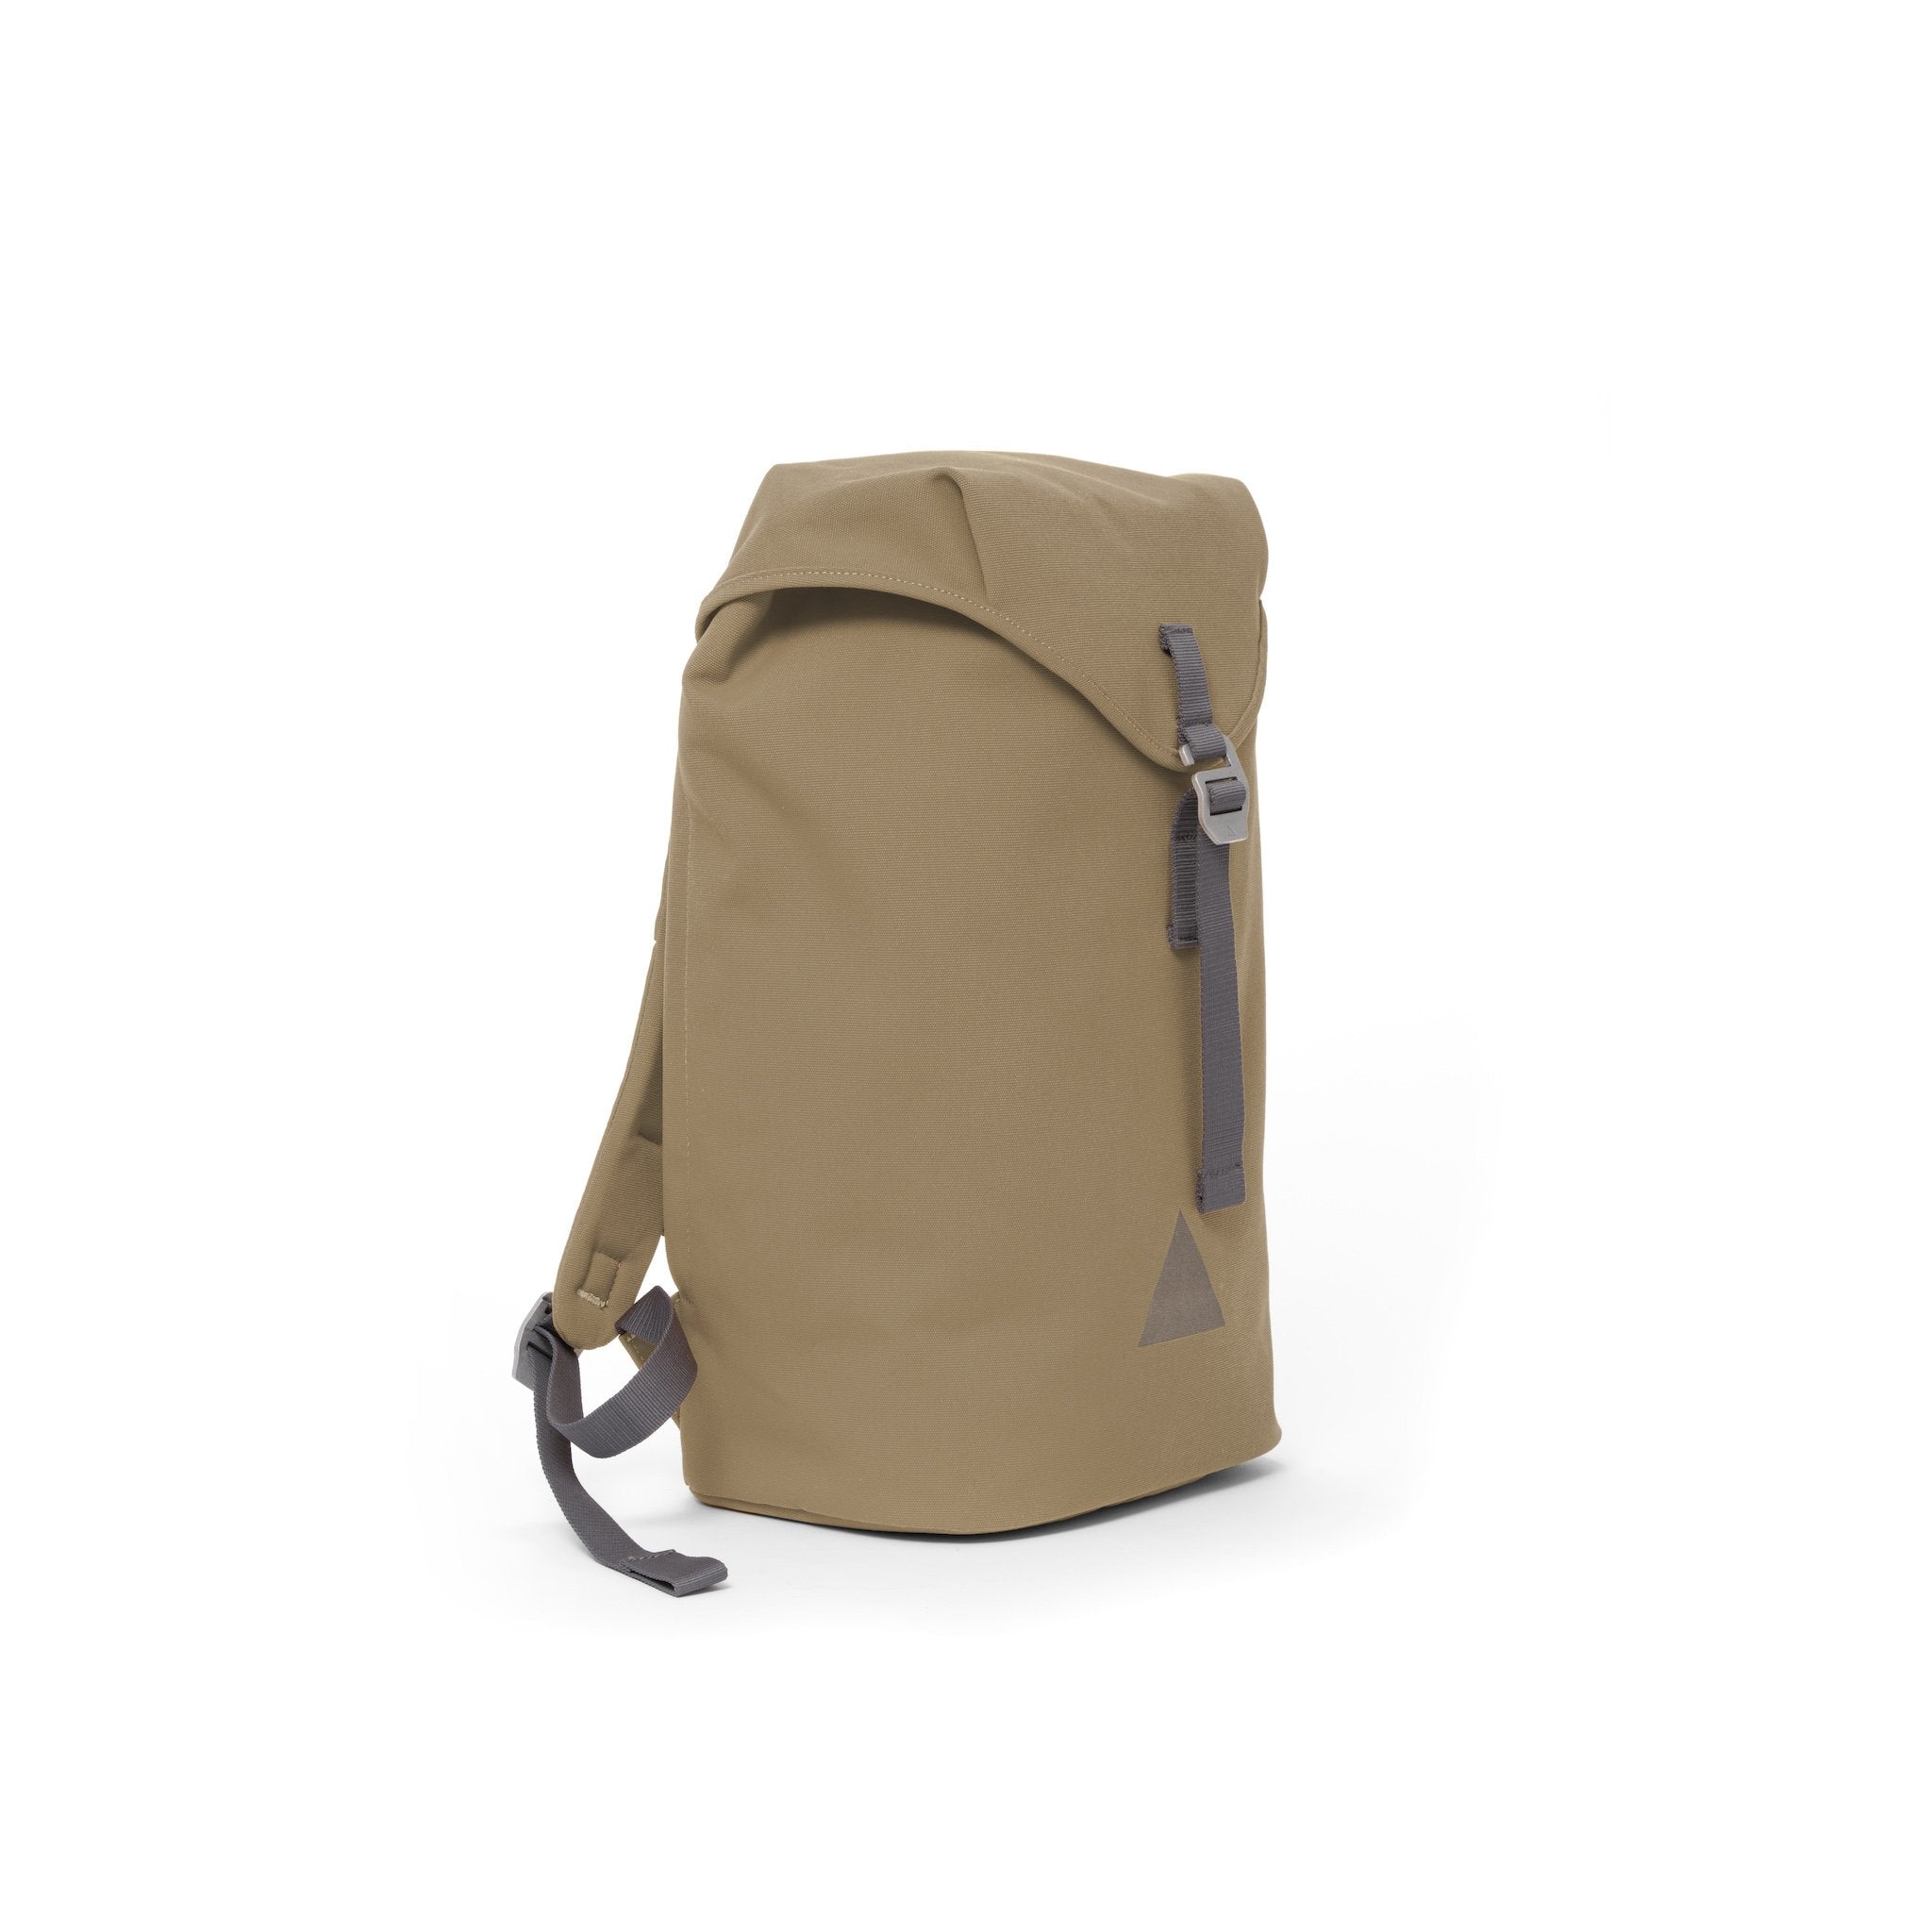 Khaki recycled canvas backpack with strap closure and metal buckle.